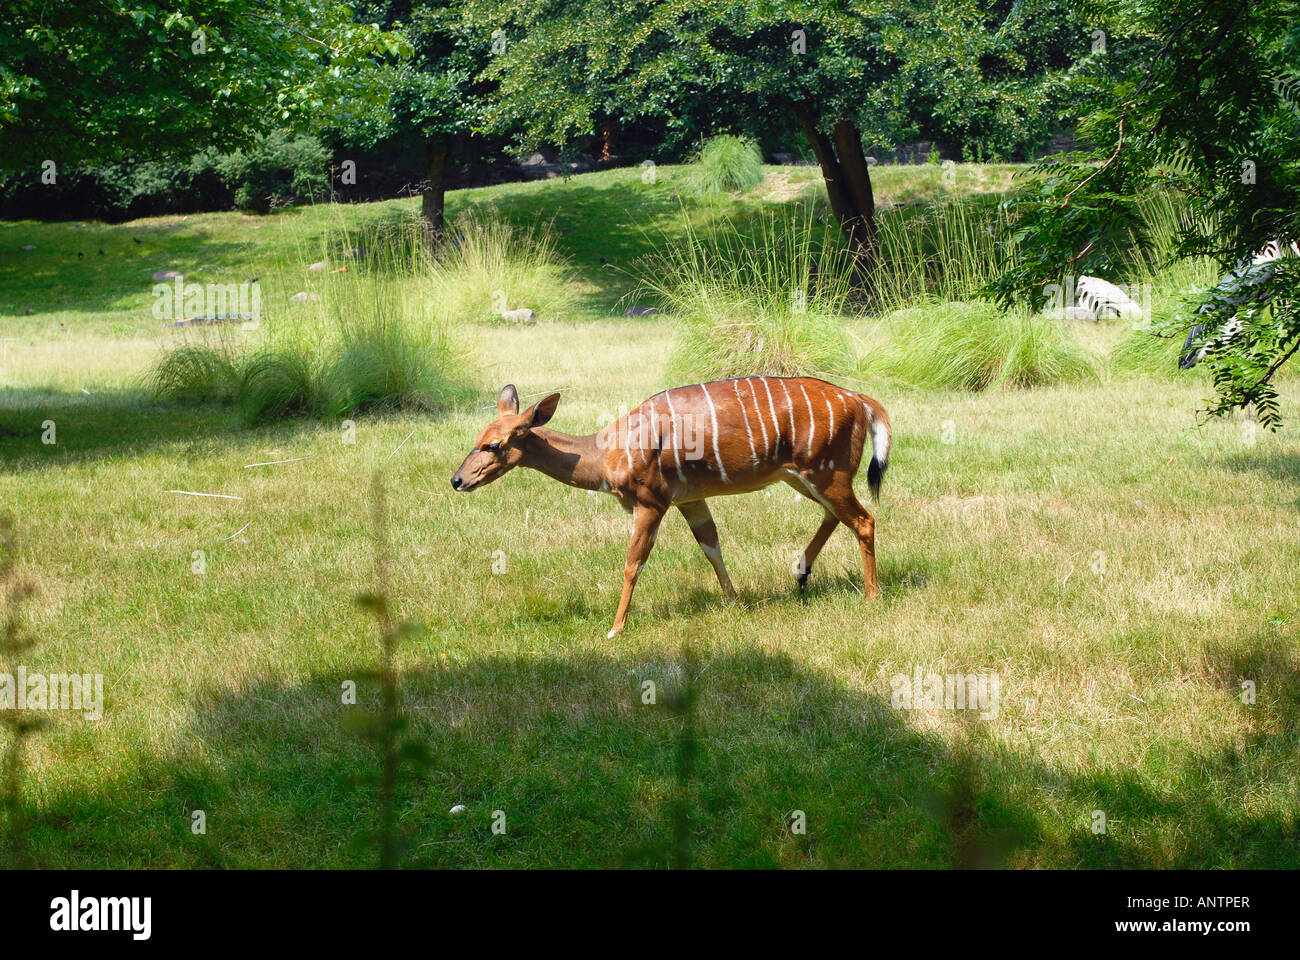 A brown Nyala Tragelaphus angasi species with white stripes in an open field Stock Photo